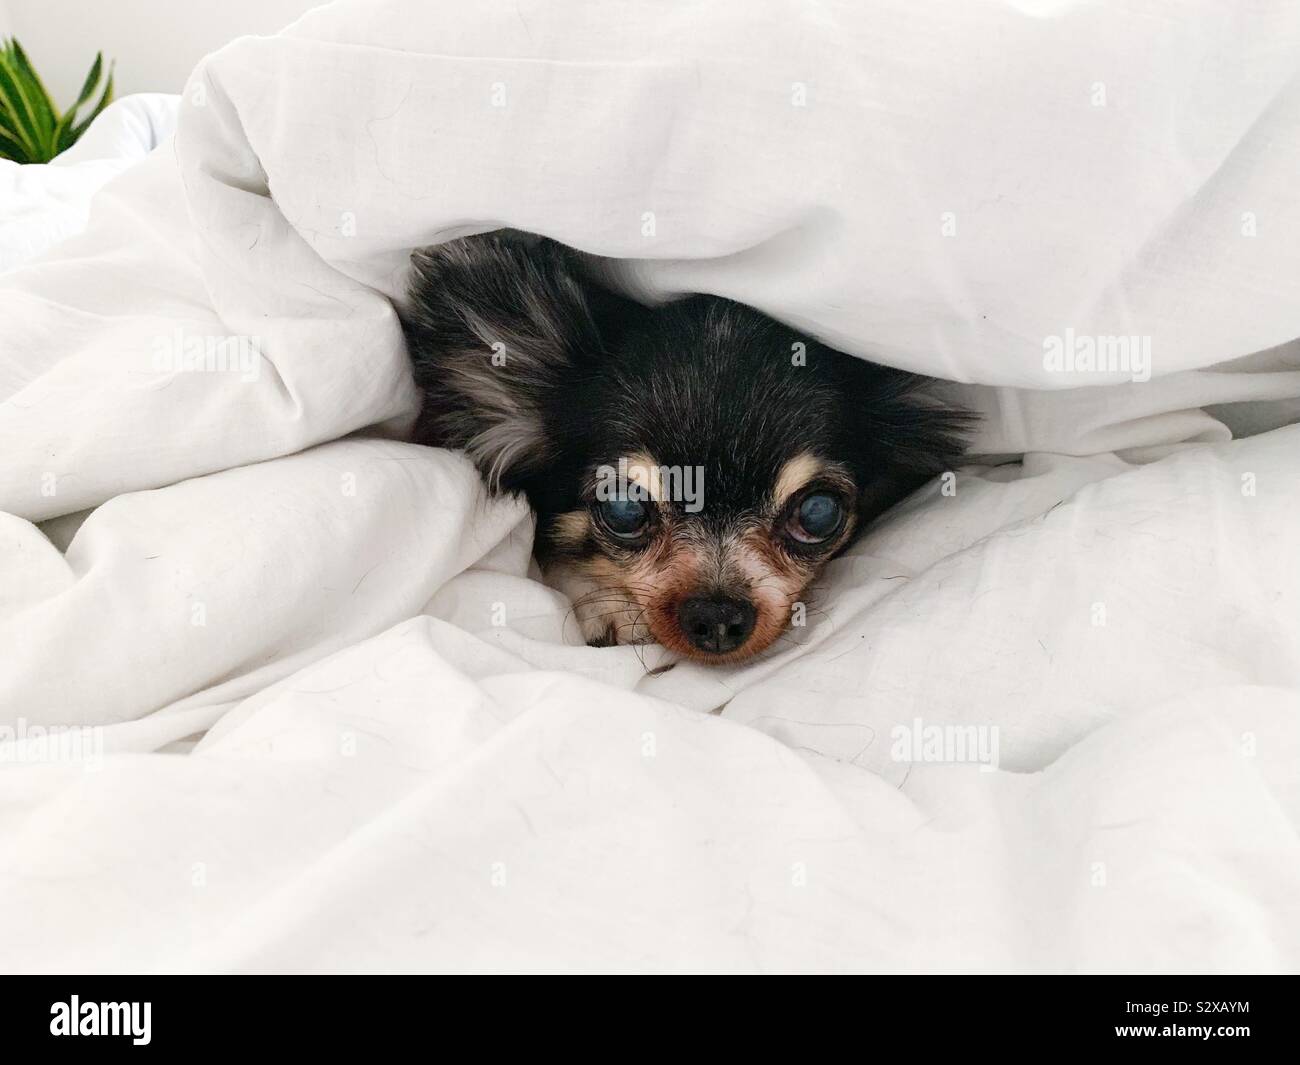 A chihuahua peering out from under a duvet Stock Photo